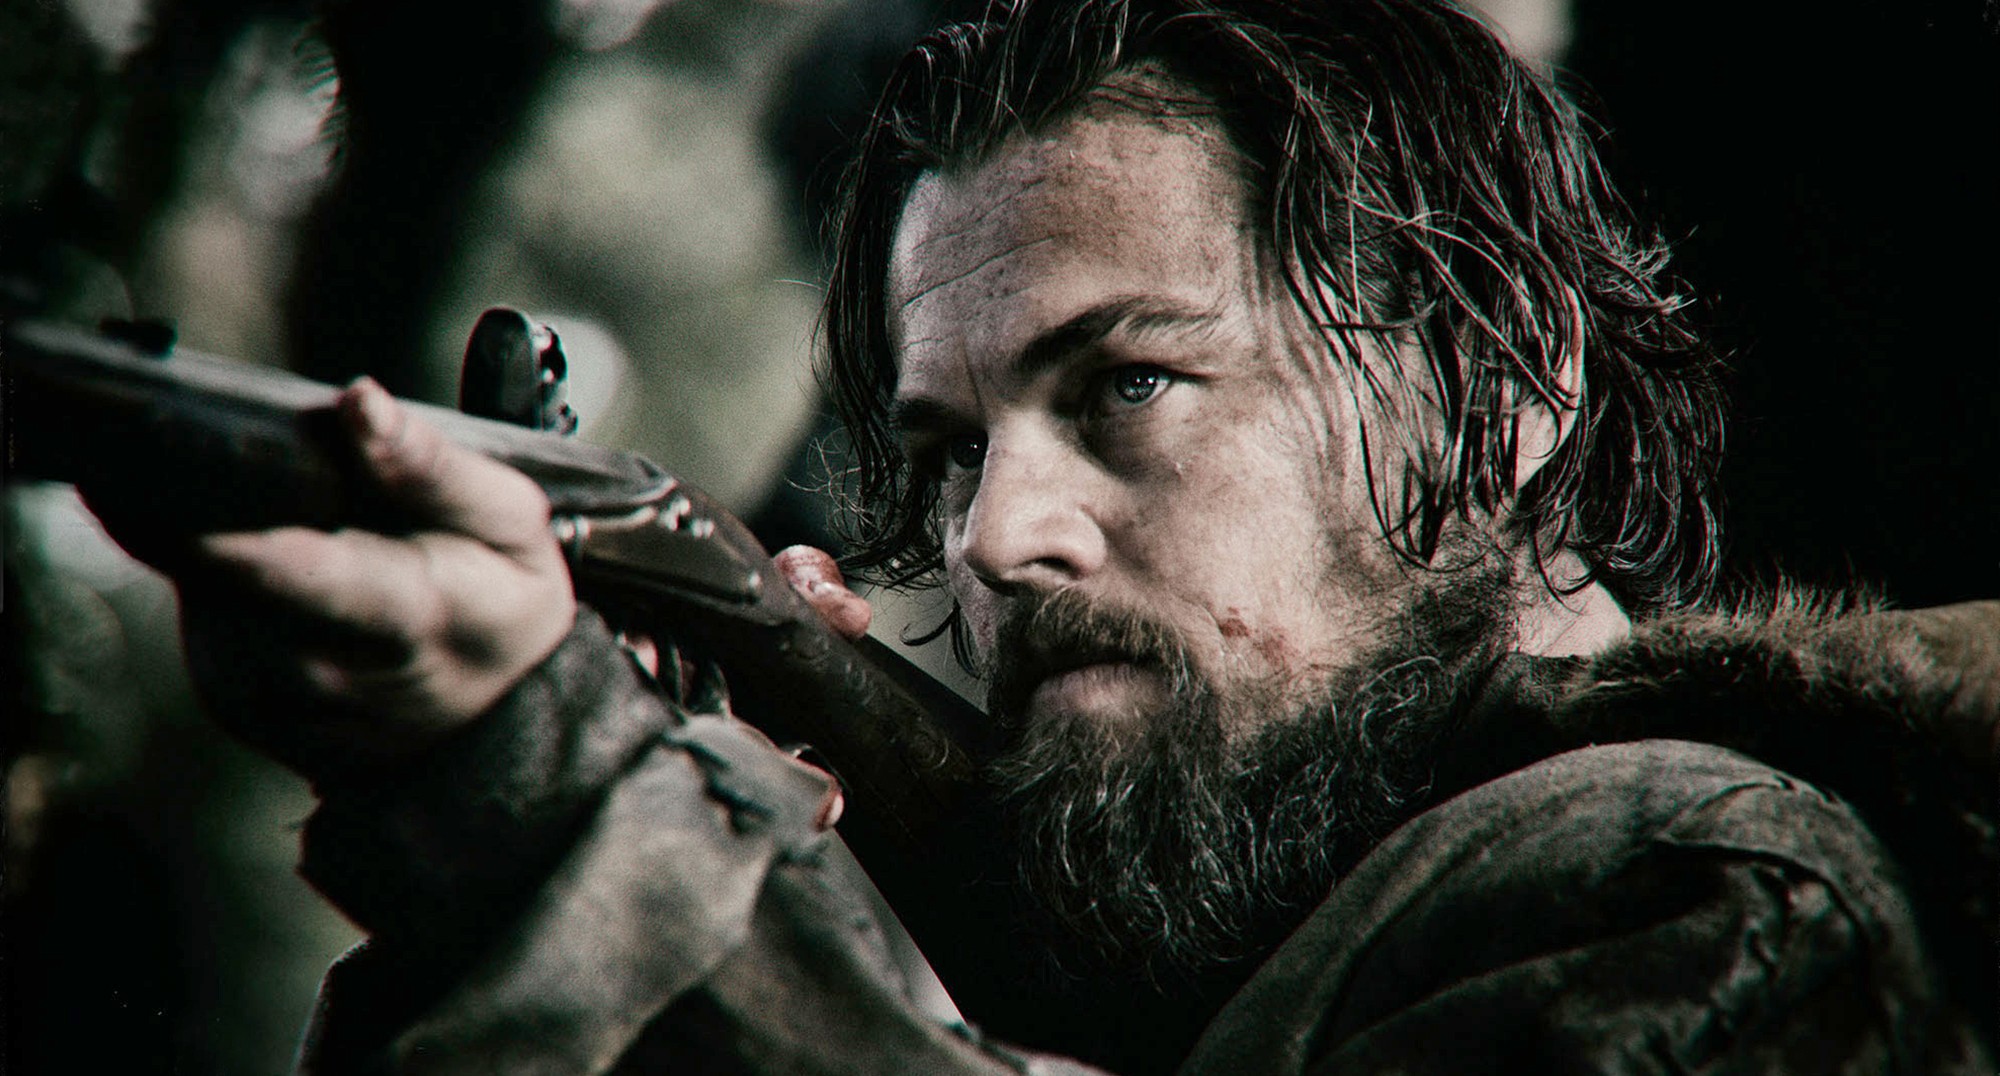 The Revenant upsets Spotlight for Best Motion Picture (Drama) at the Golden Globes